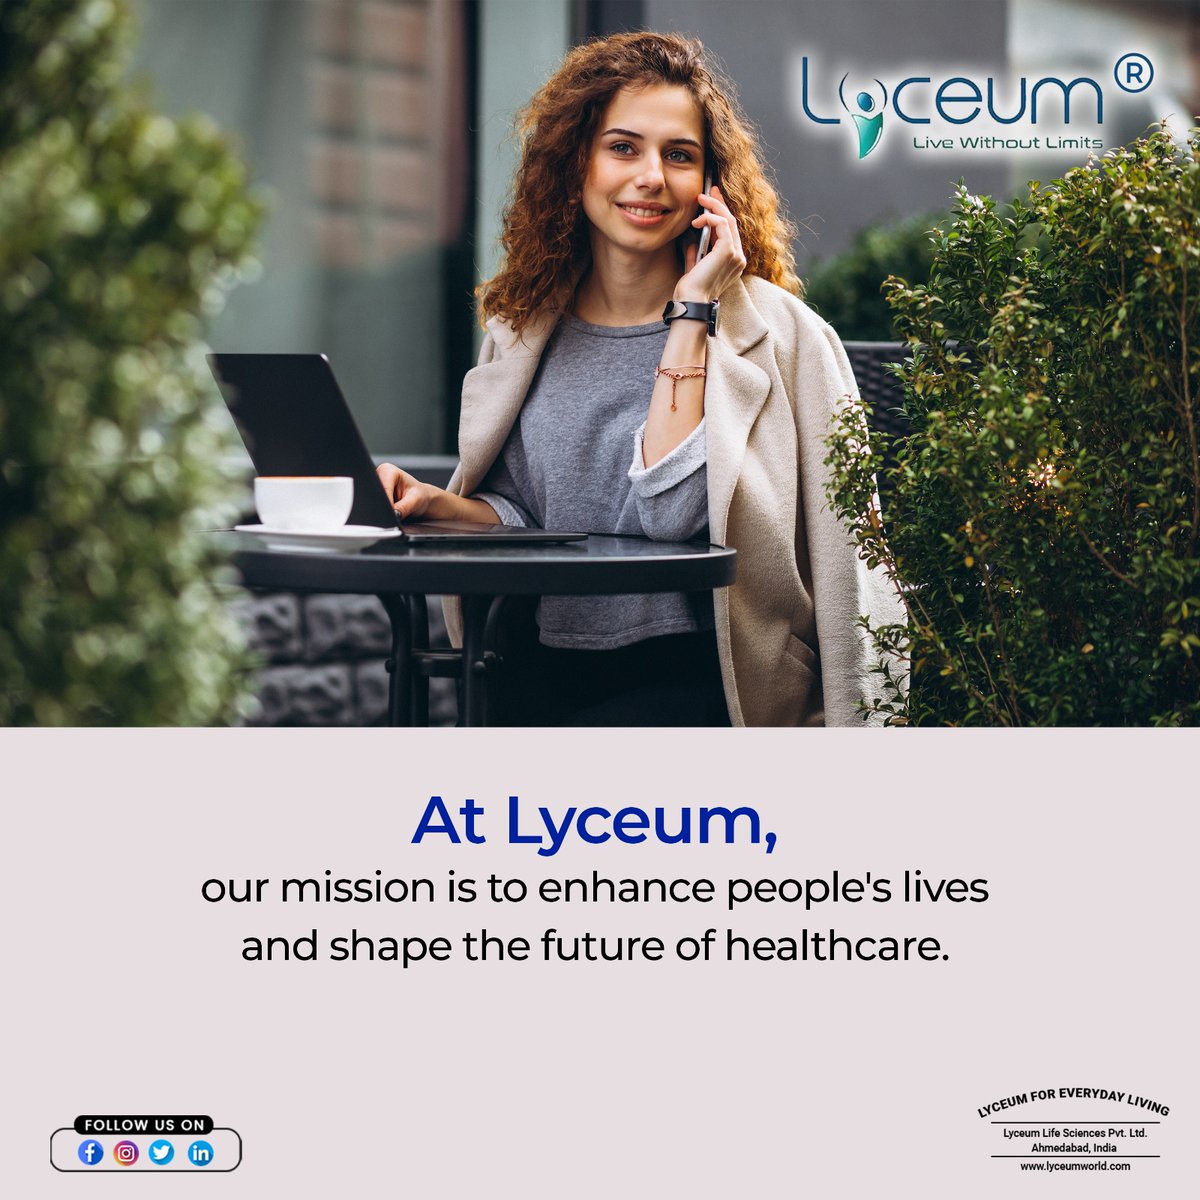 #Shaping_FutureOfHealthcare
#Lyceum_World 
#Live_Without_Limits